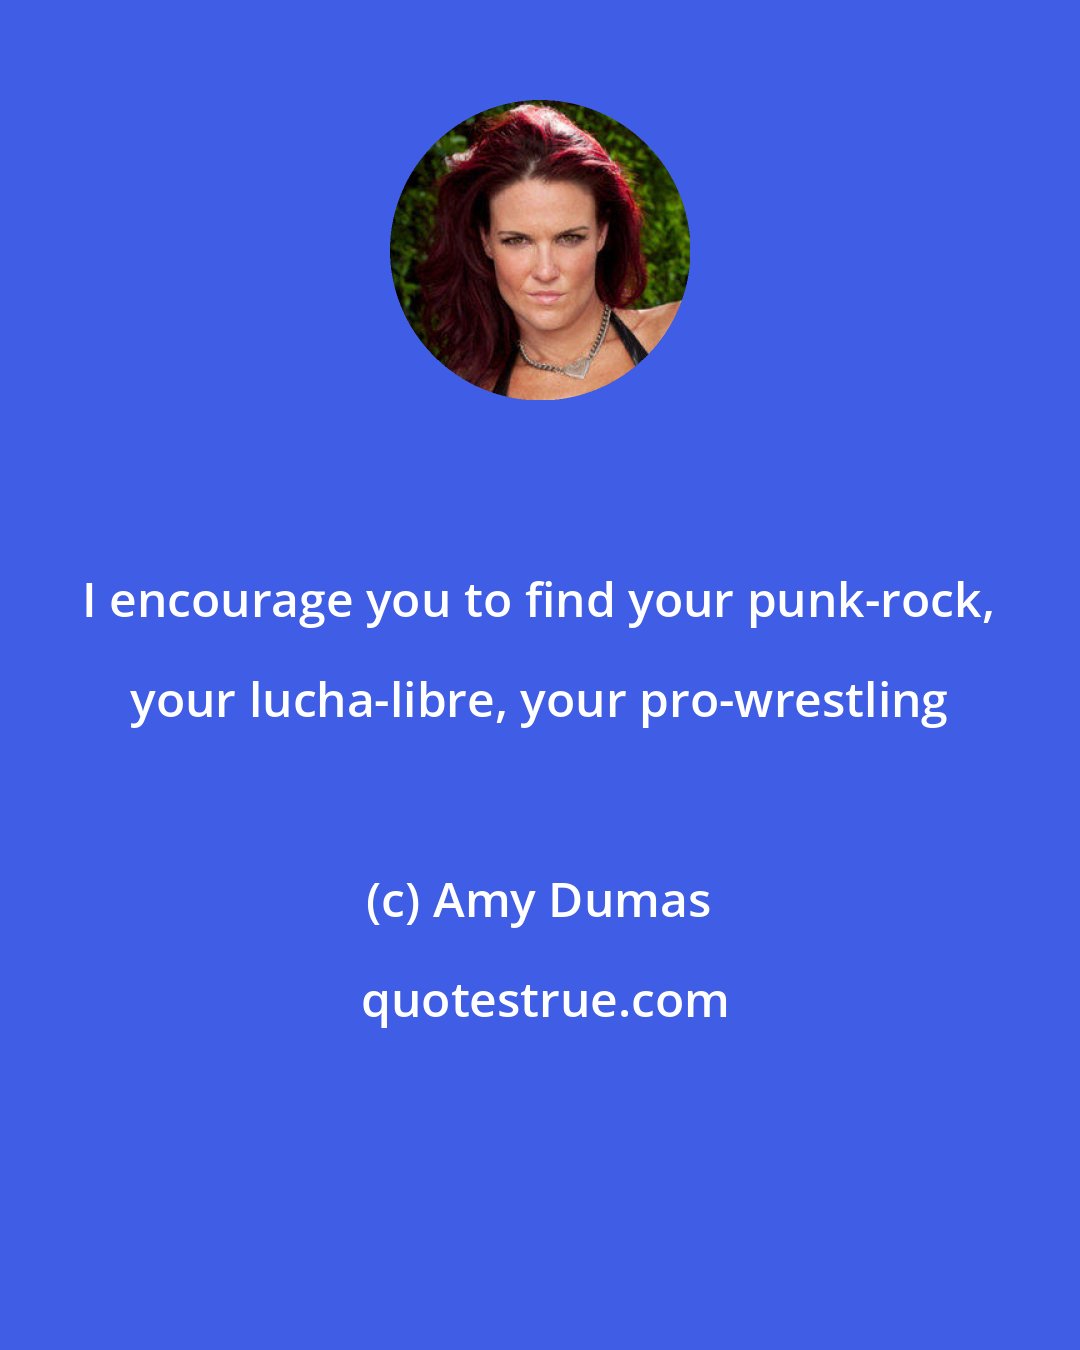 Amy Dumas: I encourage you to find your punk-rock, your lucha-libre, your pro-wrestling